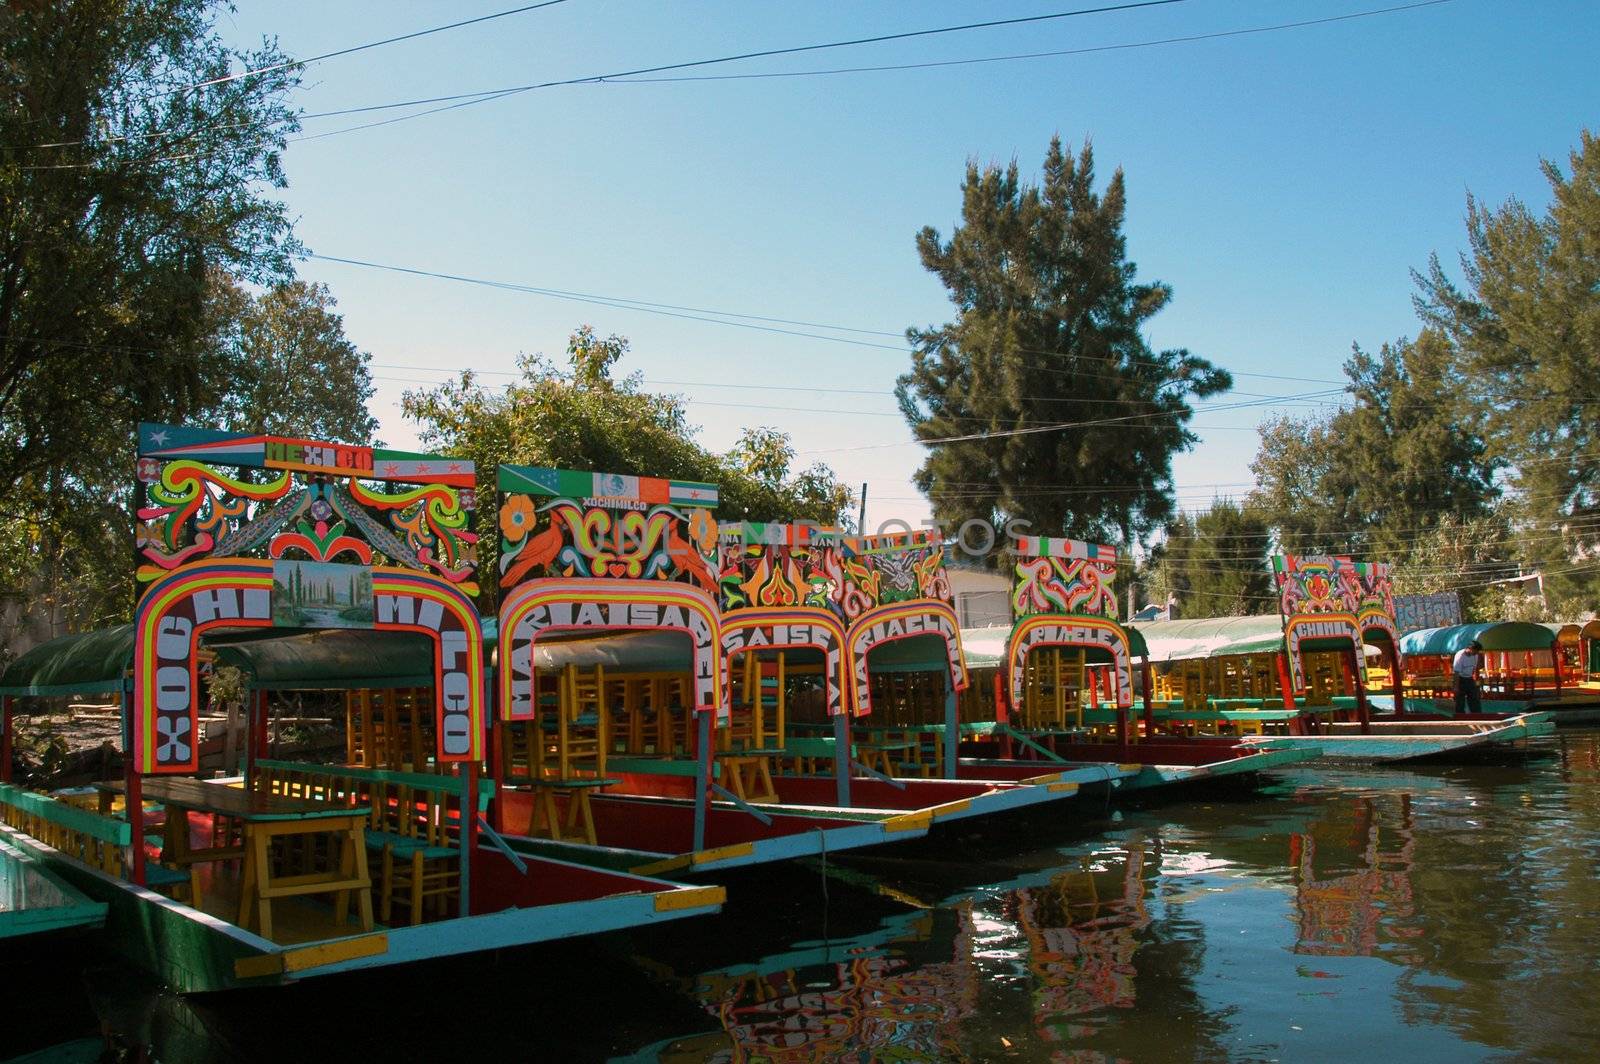 Boat in Mexico city Xochimilco by haak78